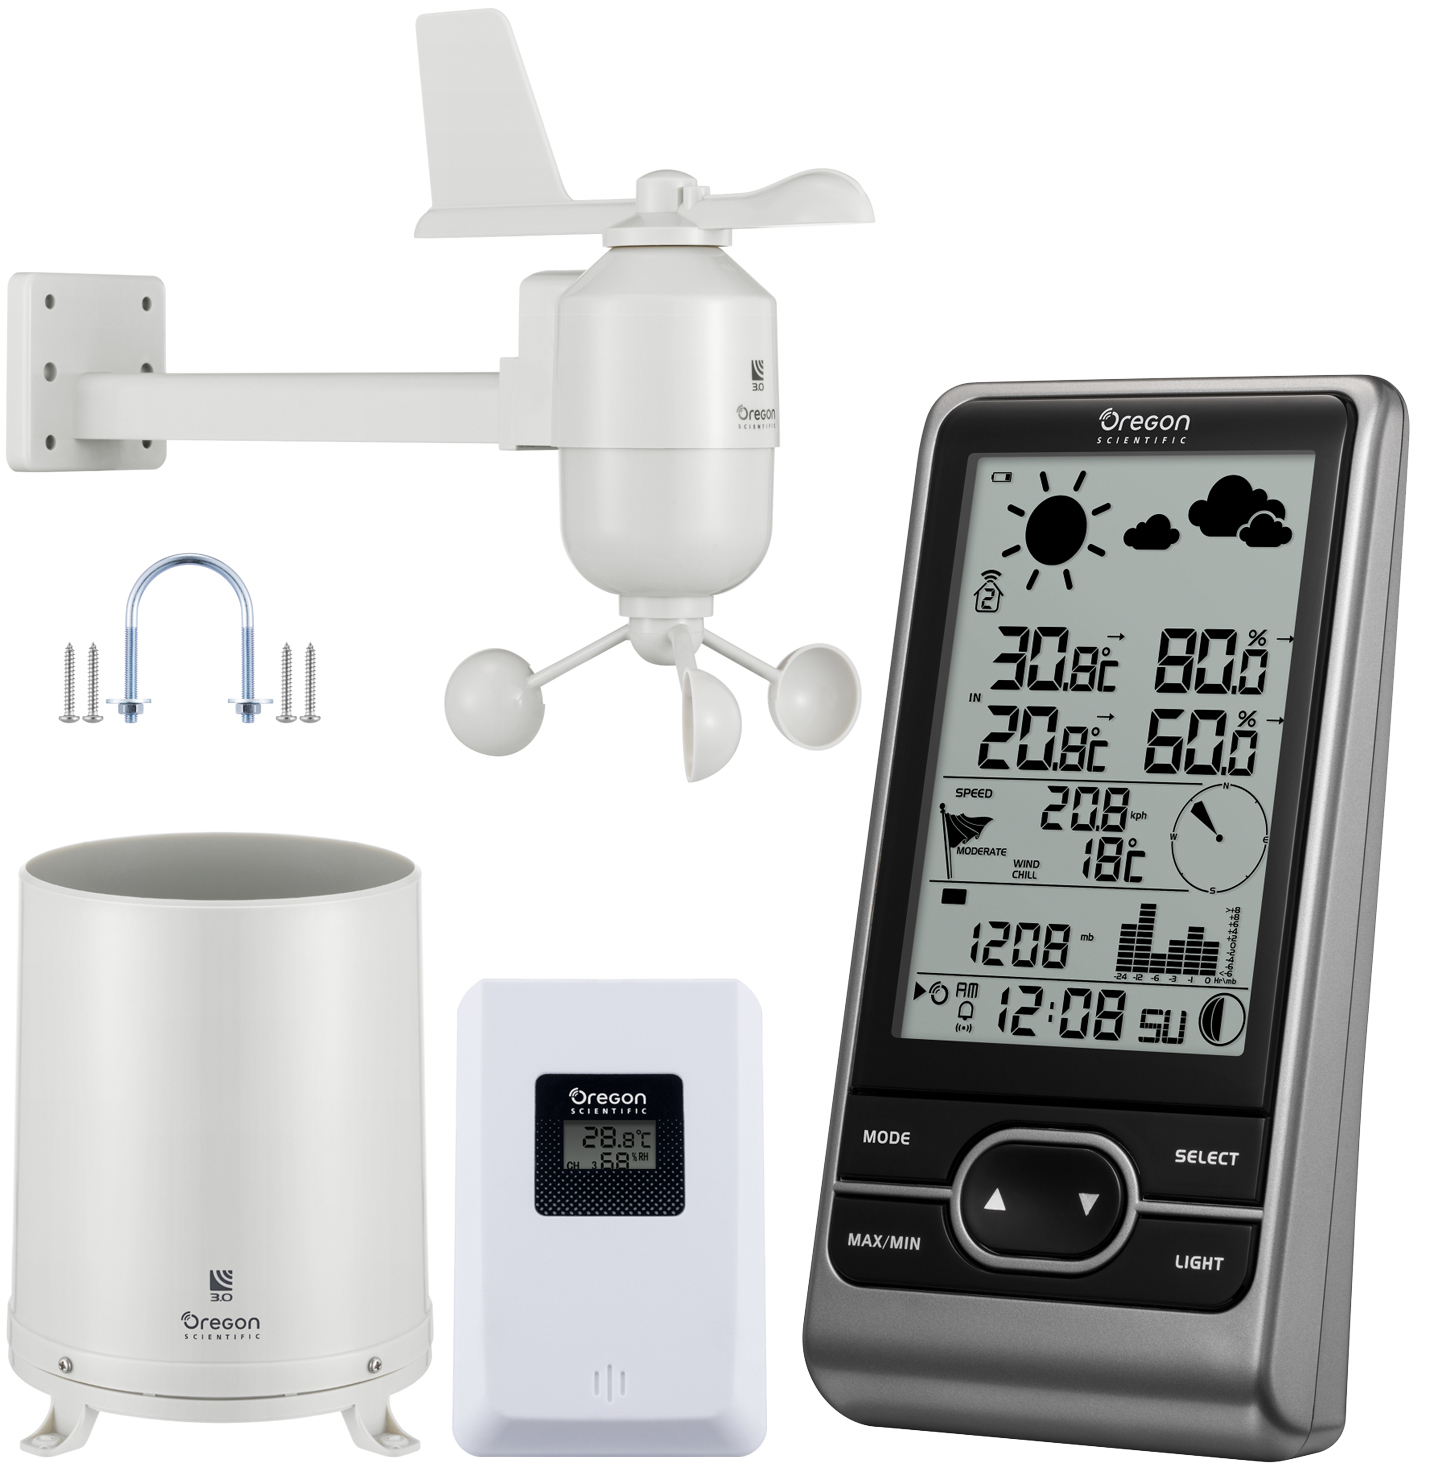 Complete Home Weather Station Displays Wind Speed Direction & chill WMR86N 